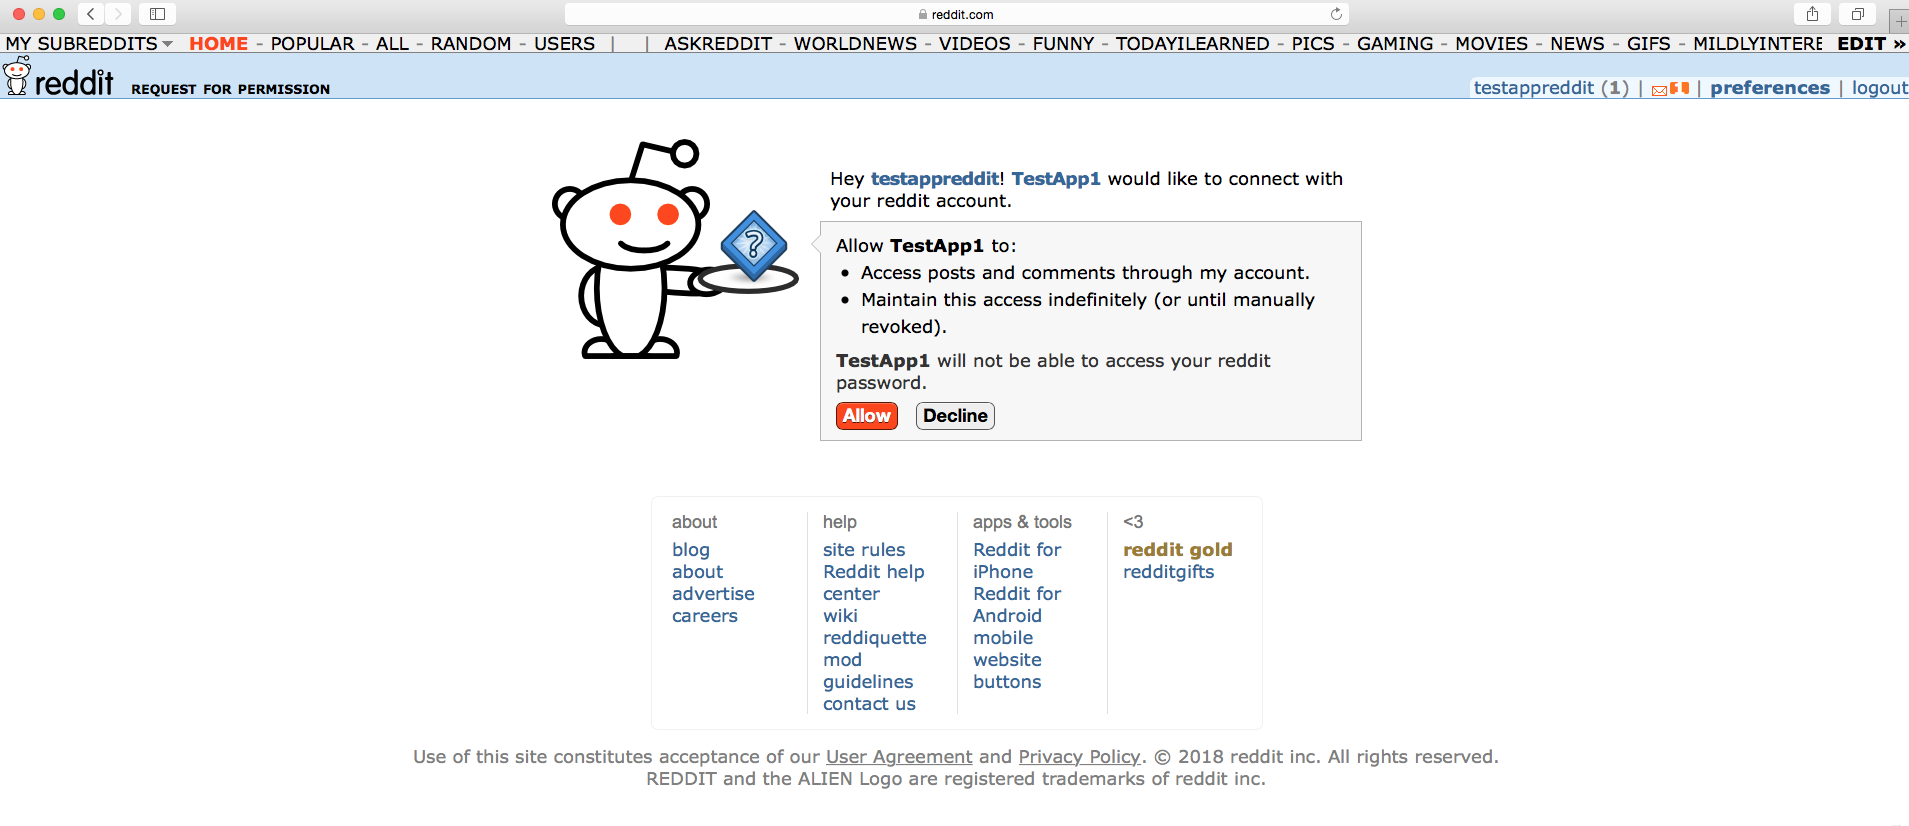 Reddit Authorization page for the web application